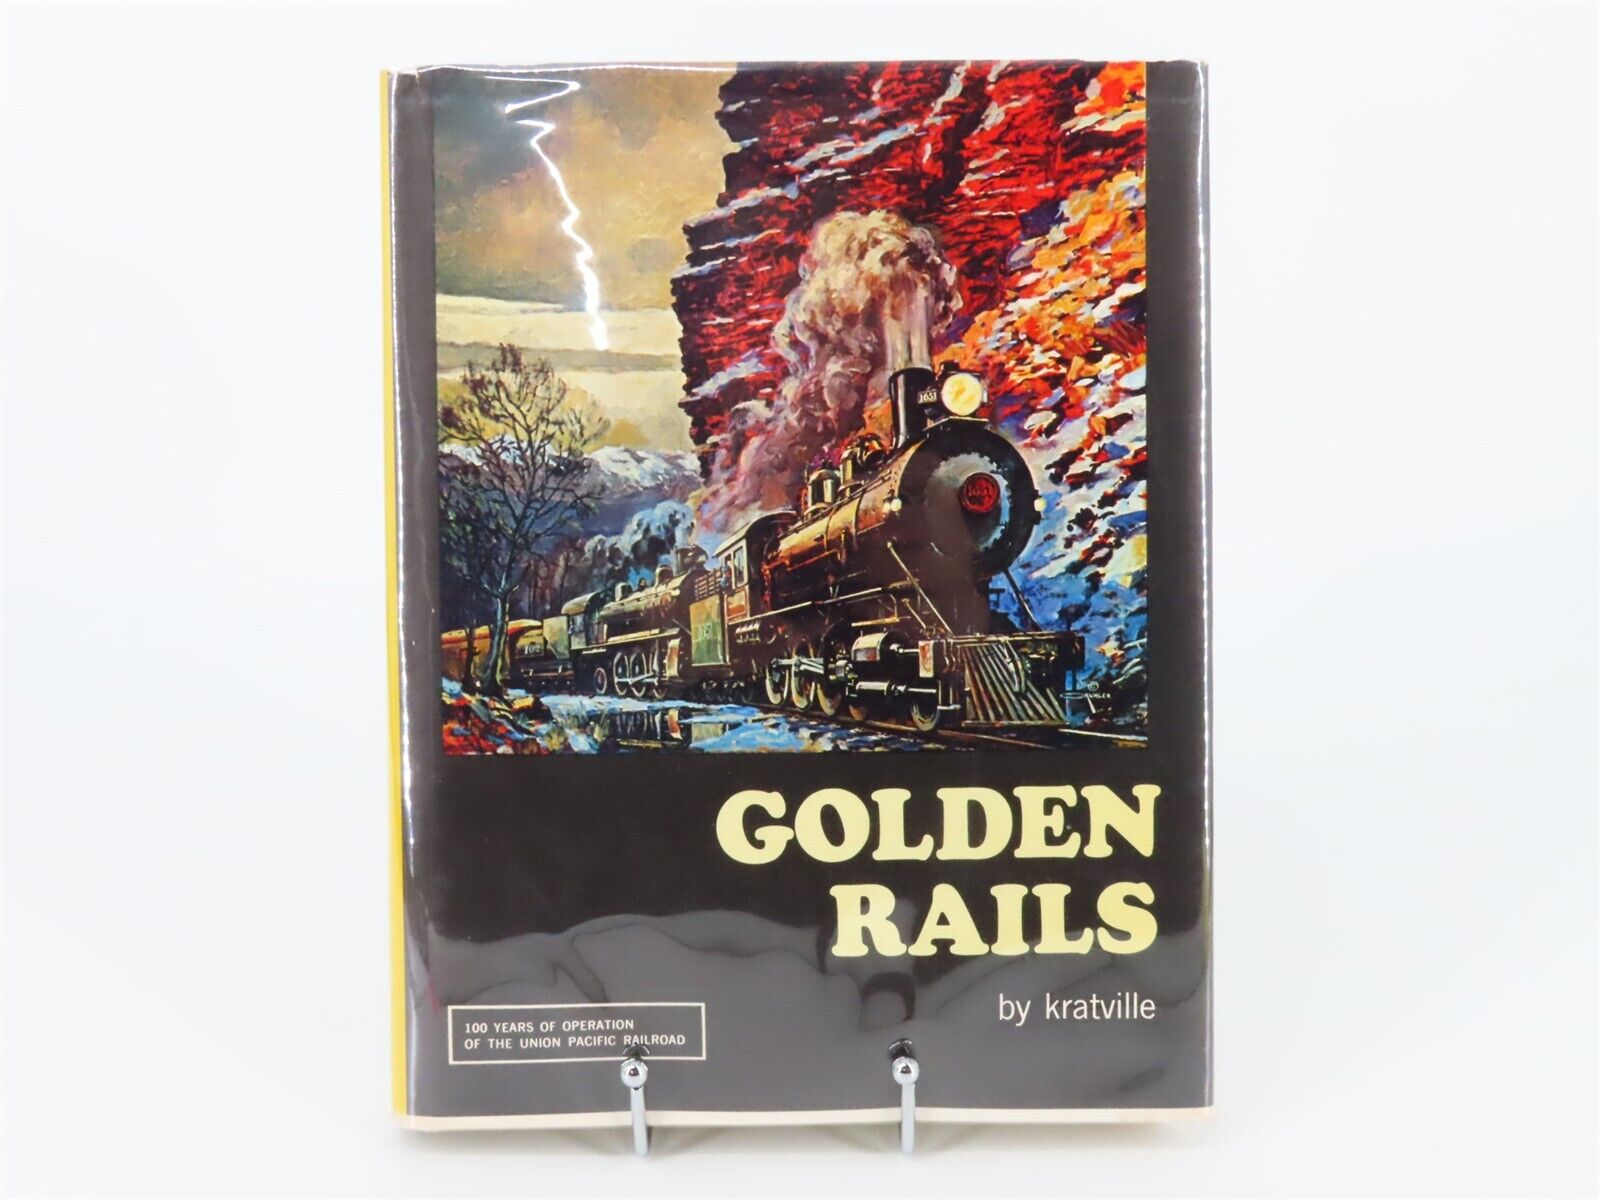 Golden Rails (100 Years Of Operation Of The UP Railroad) by Kratville ©1965 Book